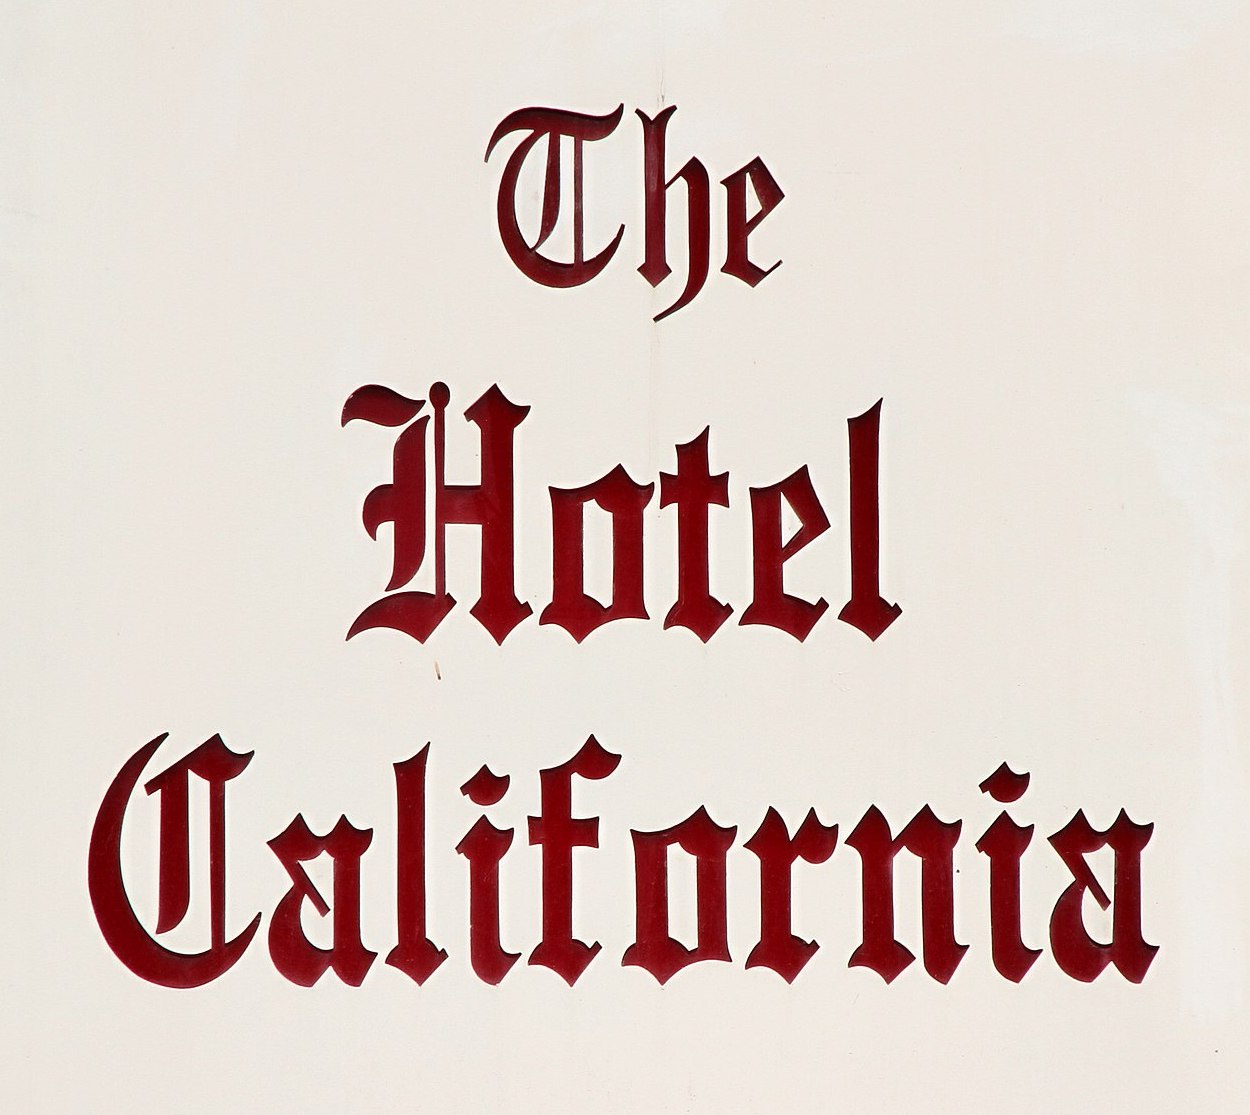 The Hotel California sign